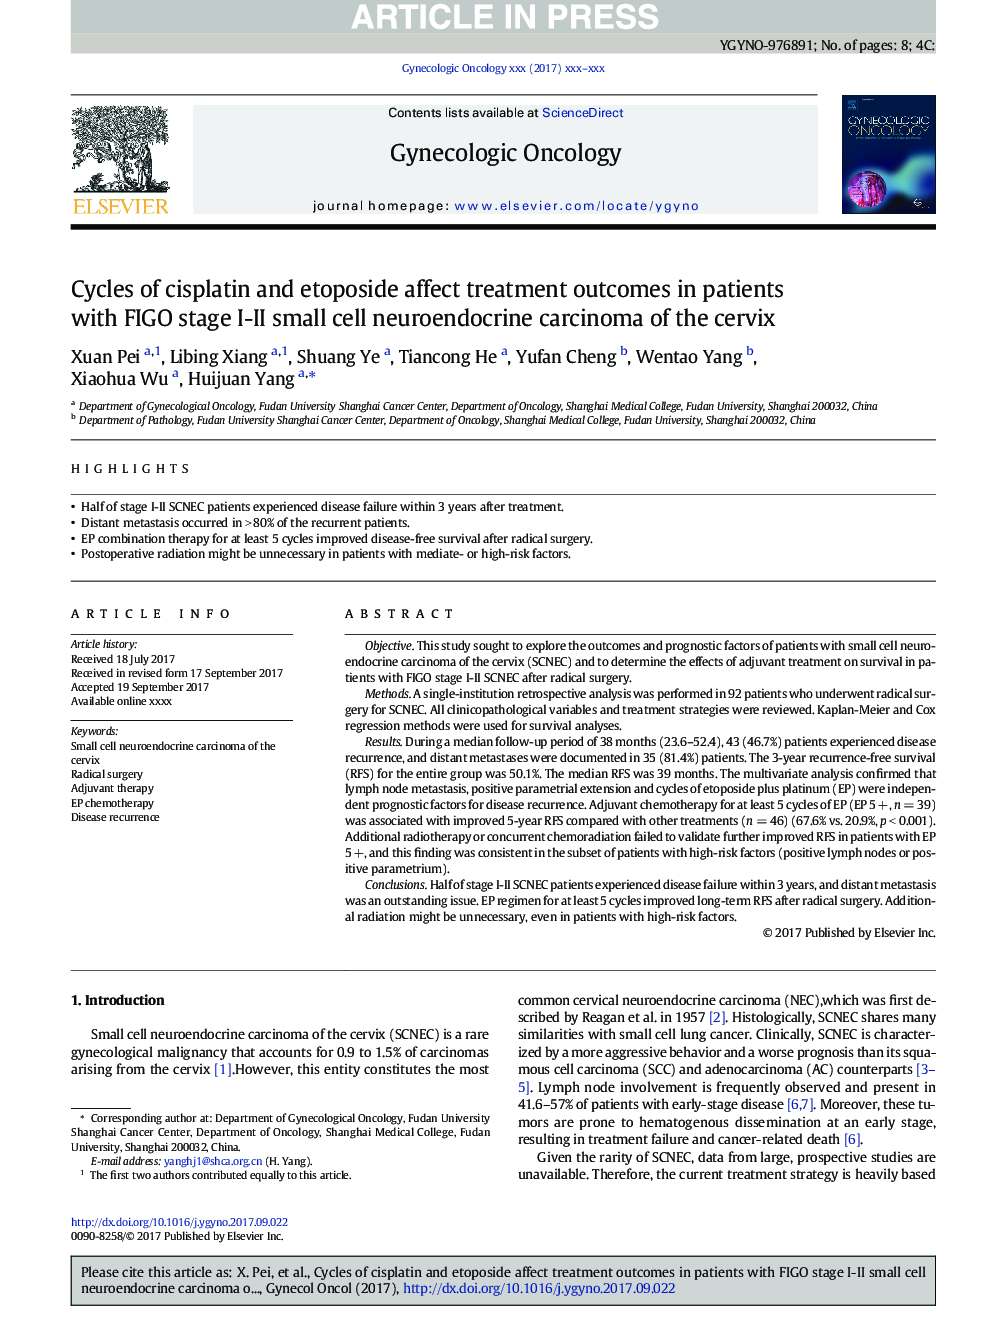 Cycles of cisplatin and etoposide affect treatment outcomes in patients with FIGO stage I-II small cell neuroendocrine carcinoma of the cervix